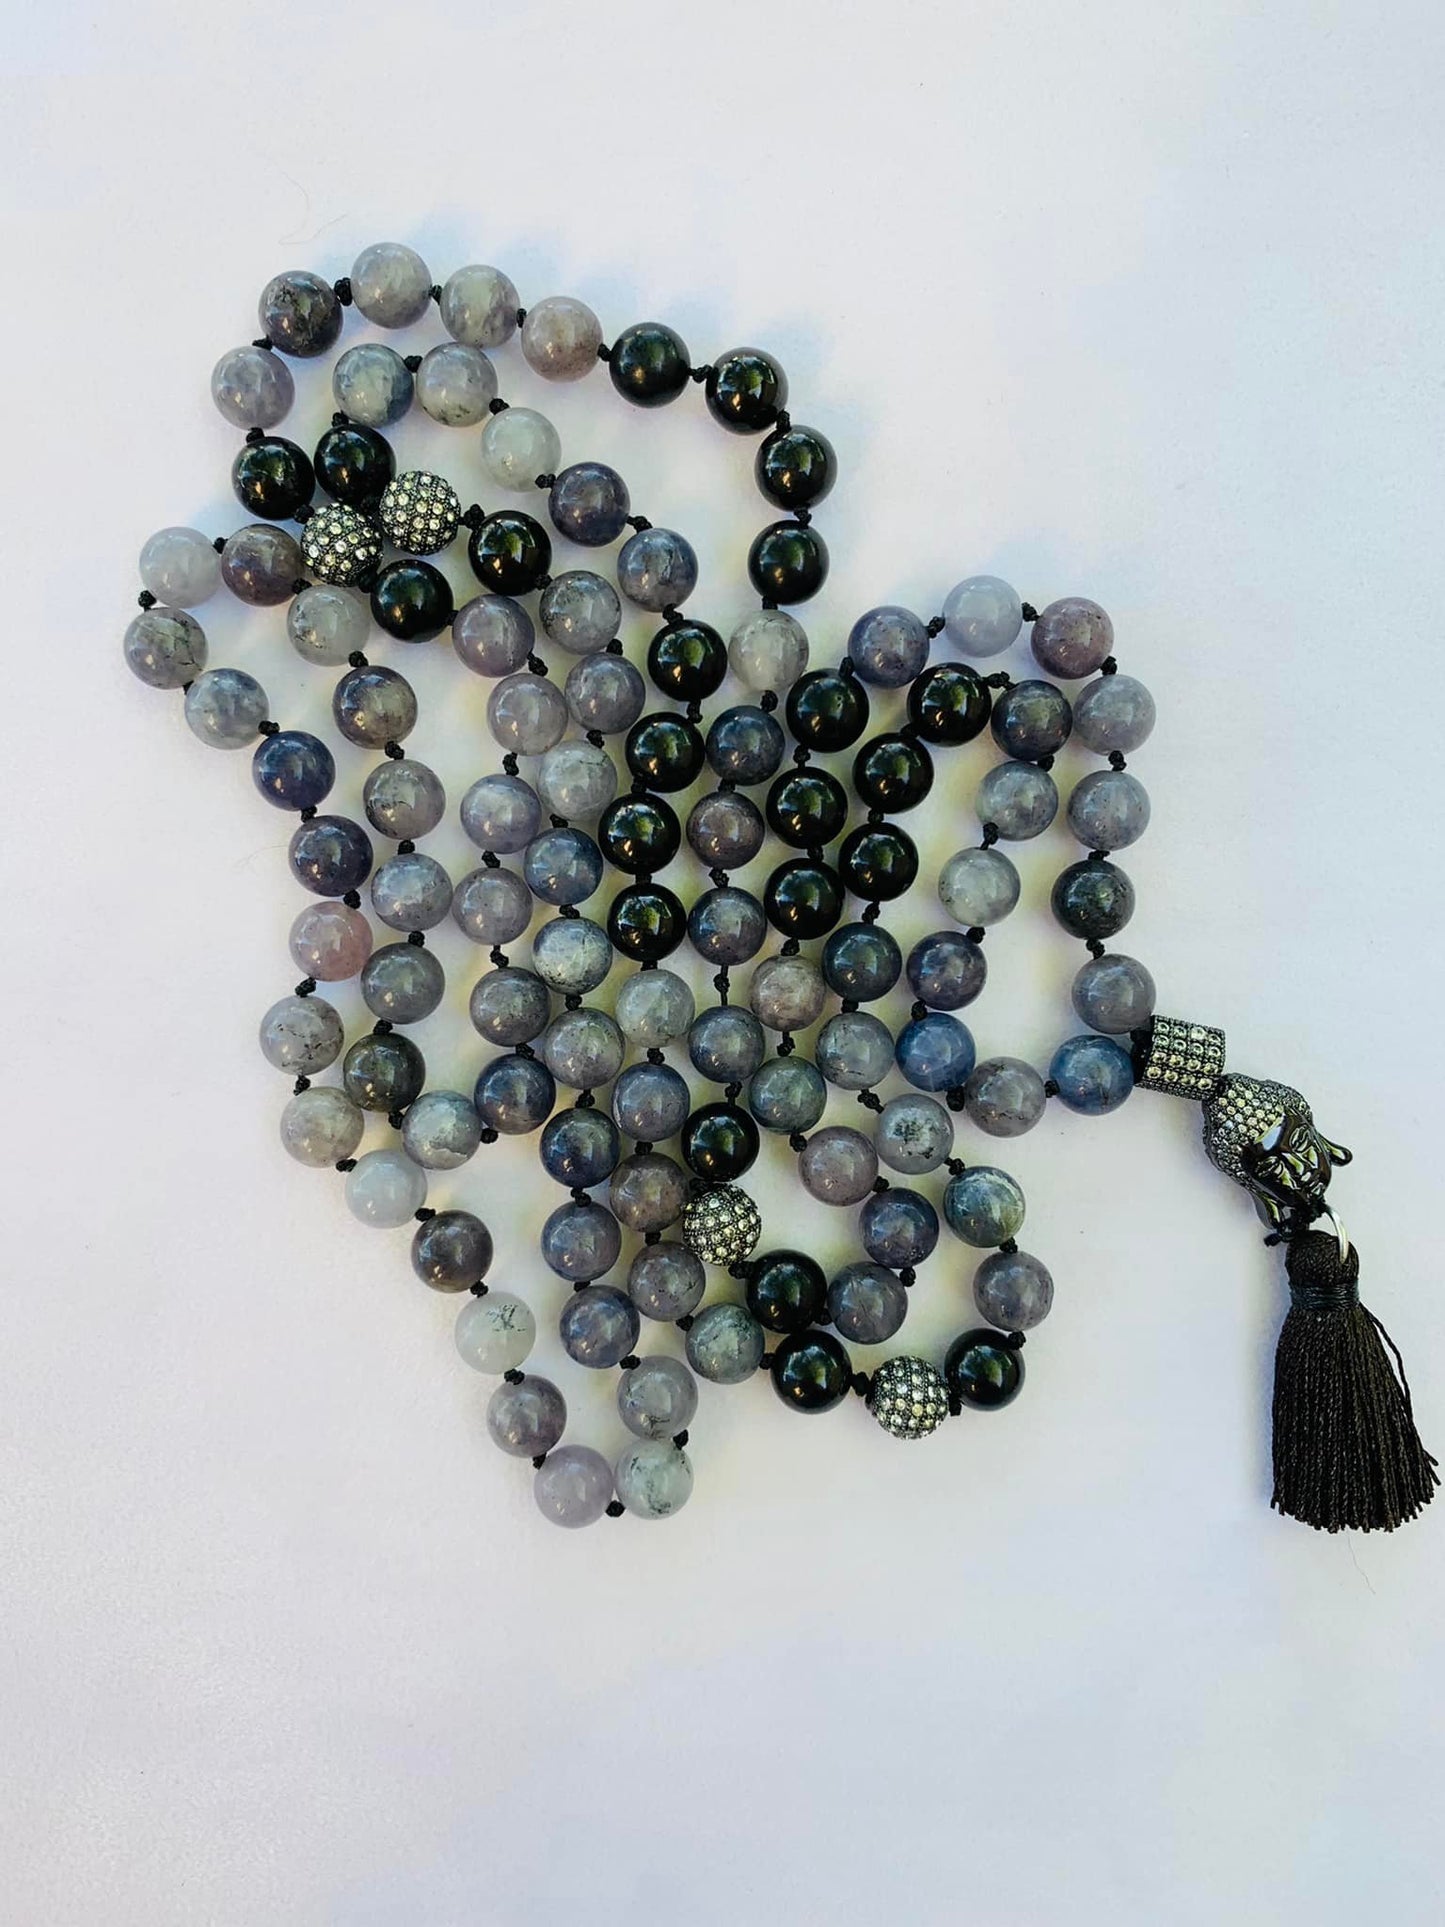 Persephone Mala - Connecting With Your Master Guide - Iolite, Shungite, Black Metal Accent Beads with Rhinestones